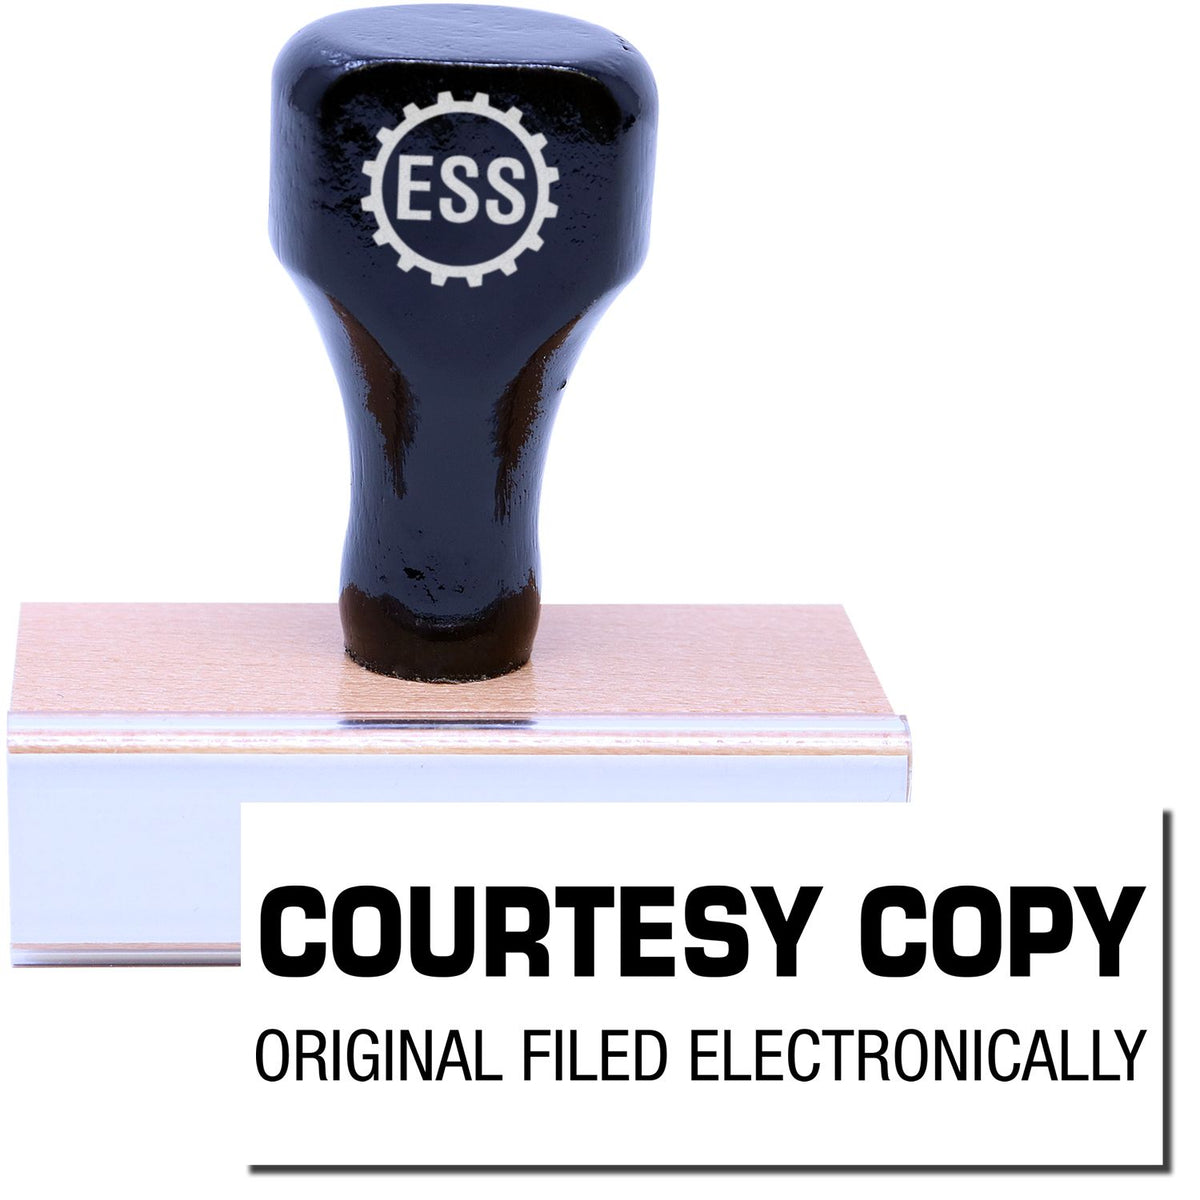 A stock office rubber stamp with a stamped image showing how the text &quot;COURTESY COPY ORIGINAL FILED ELECTRONICALLY&quot; in a large font (&quot;COURTESY COPY&quot; in bold font; &quot;ORIGINAL FILED ELECTRONICALLY&quot; in a smaller narrow font displaying under the main text) is displayed after stamping.